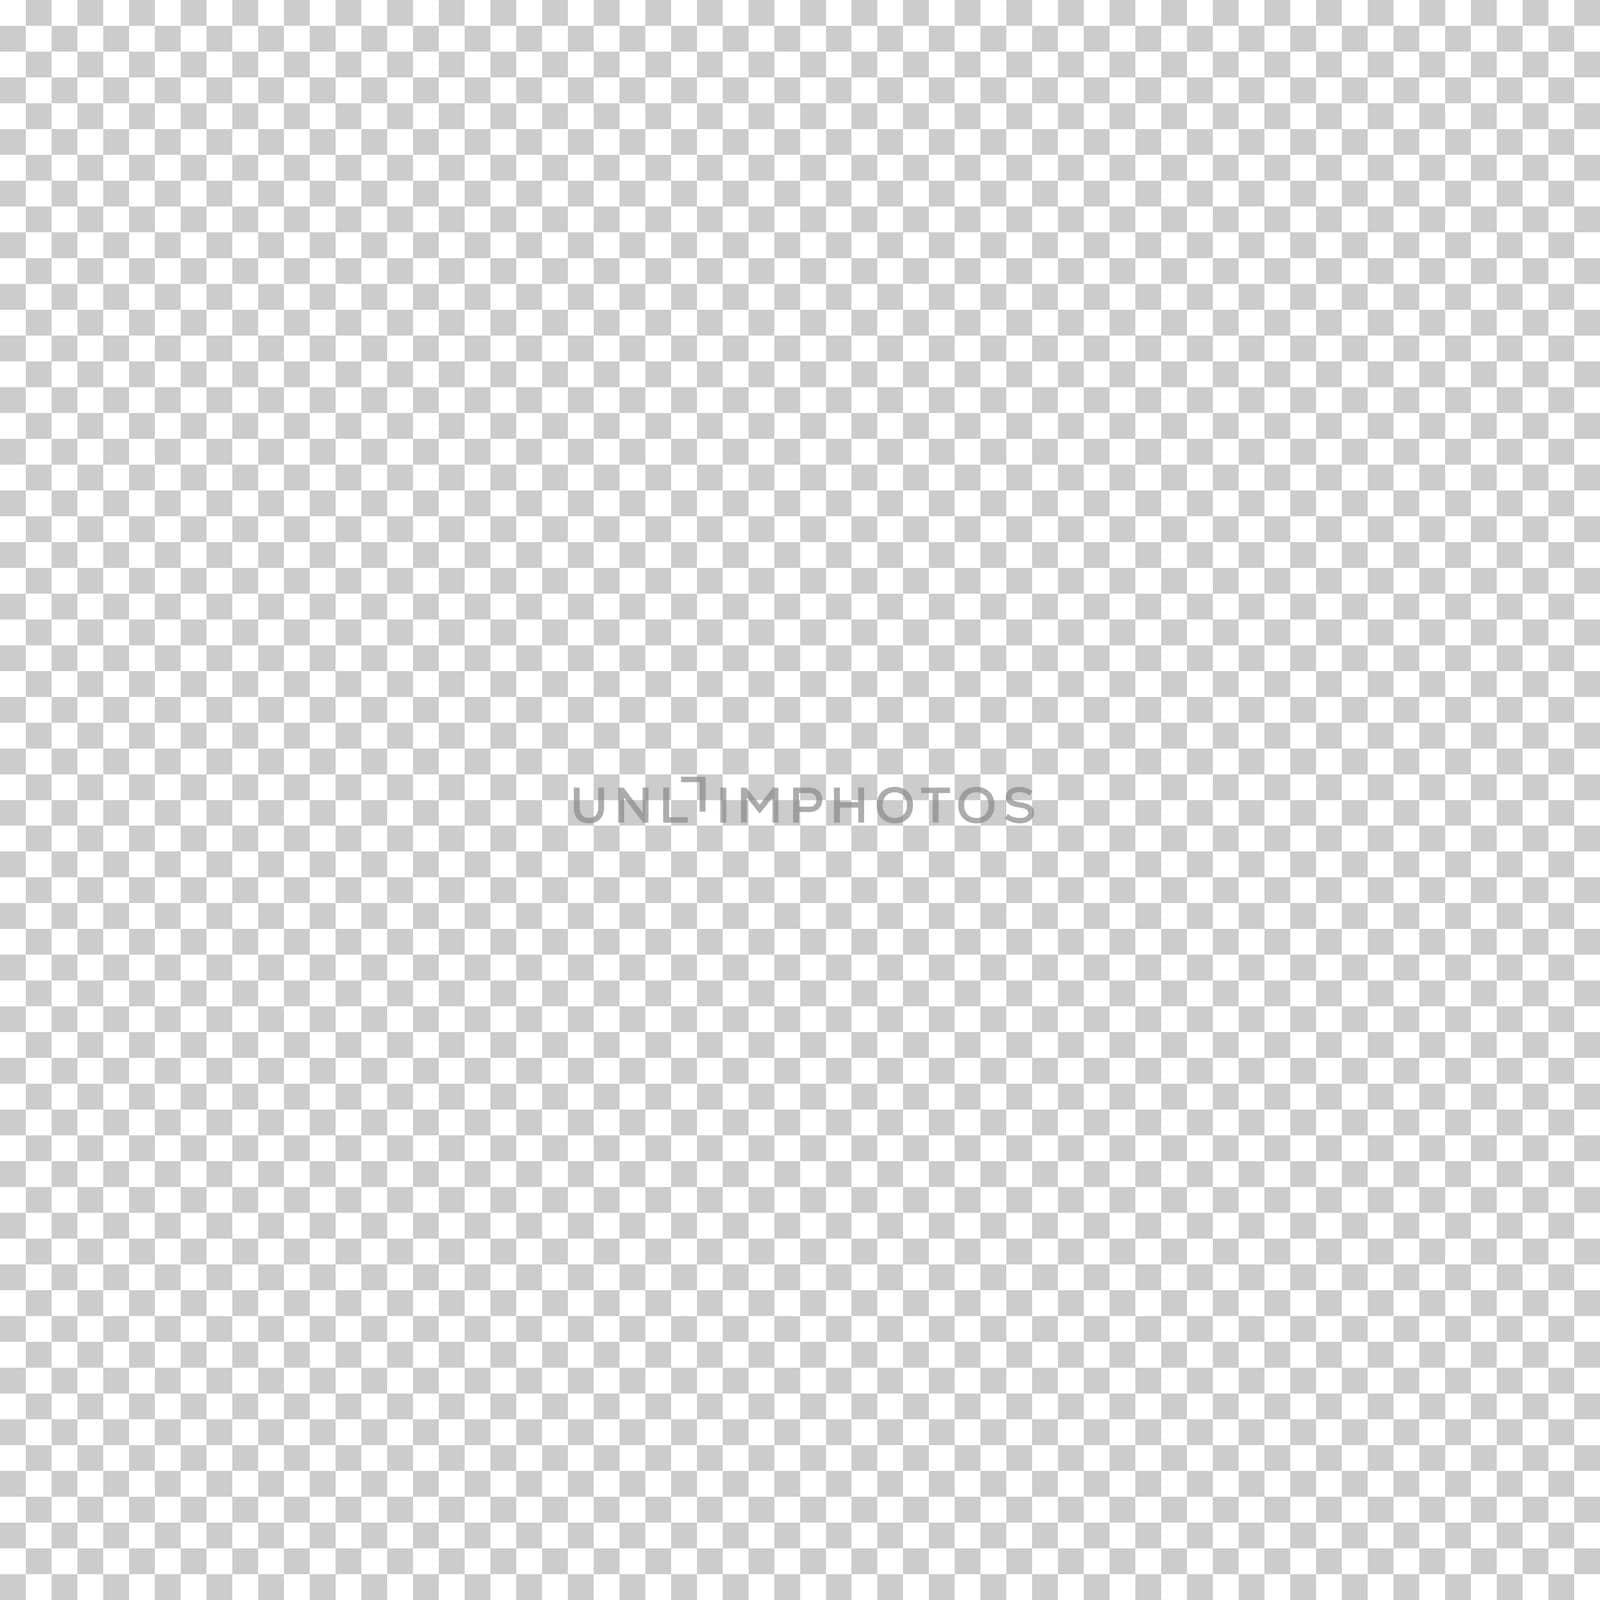 Transparency grid seamless texture. Transparent background in the graphical editor interface by EvgeniyQW